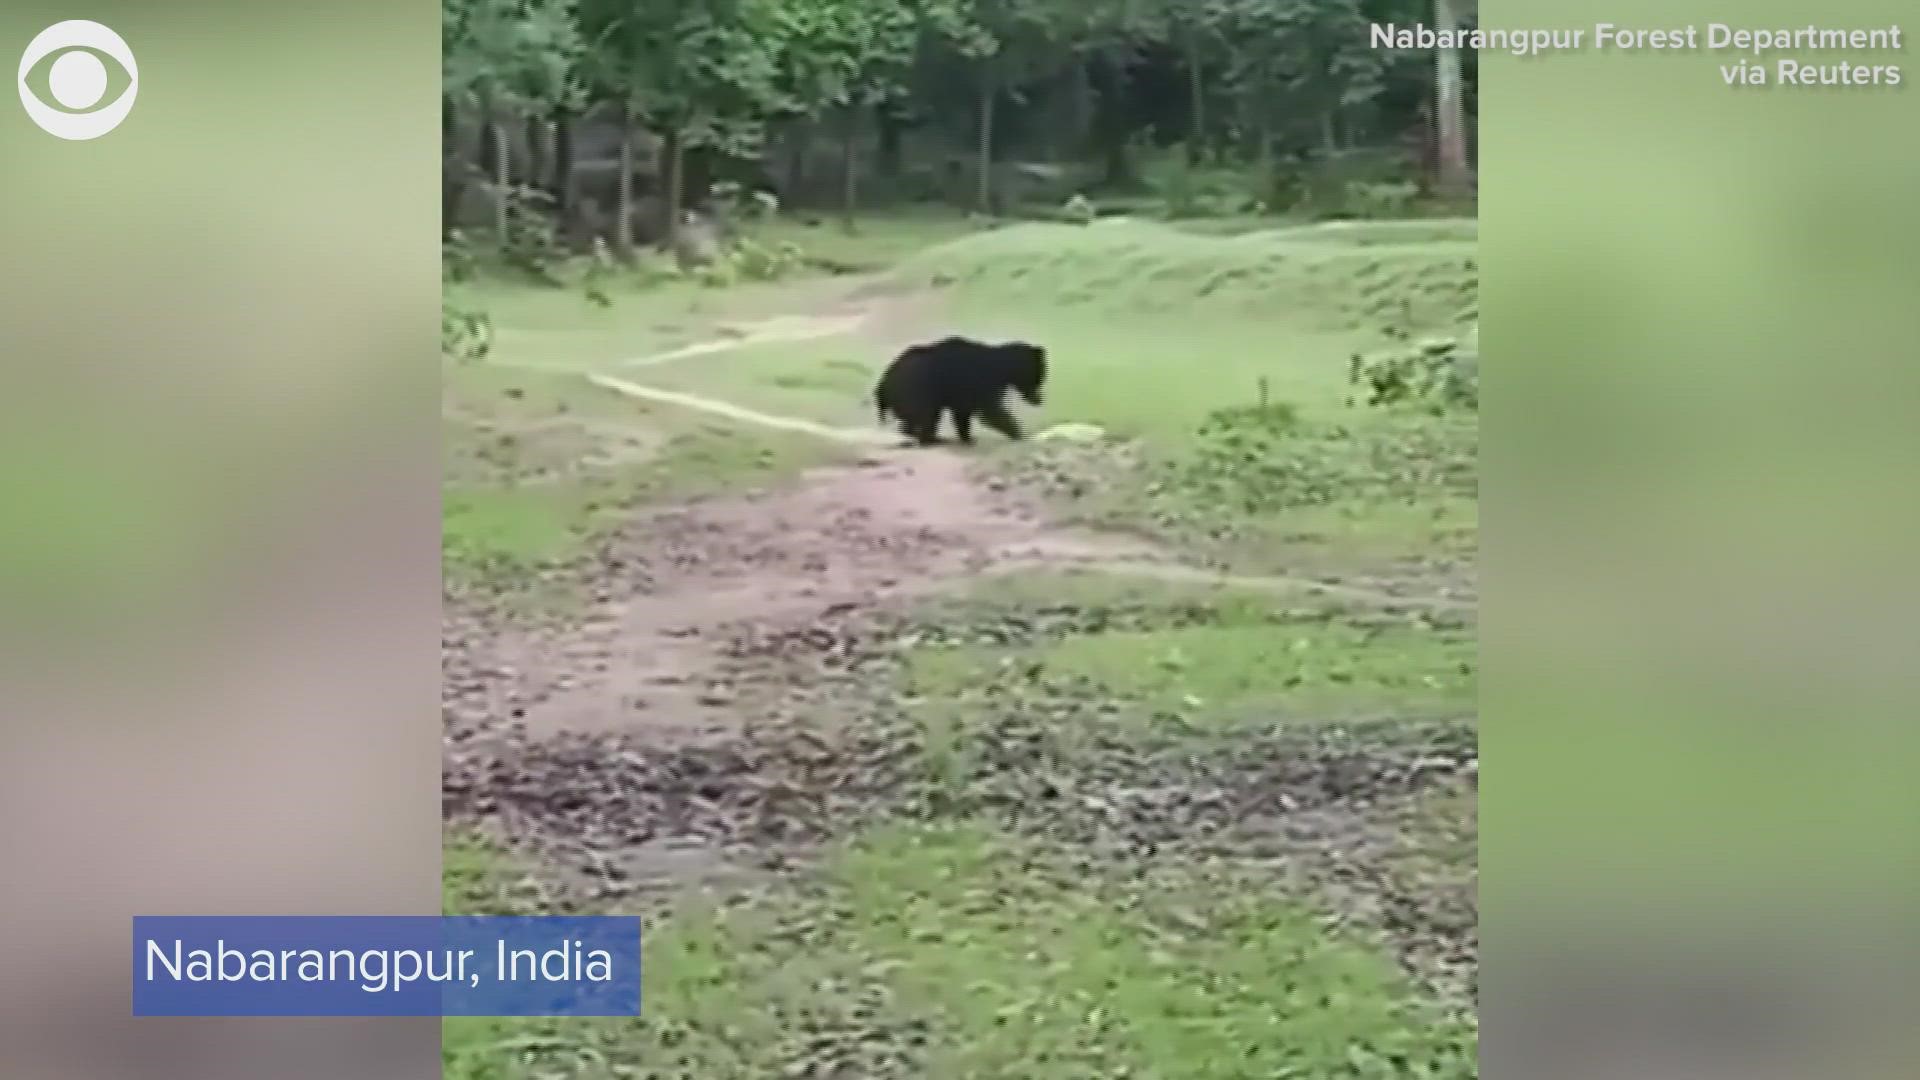 BEARS PLAY BALL: Two bears were recently caught on video playing with a soccer ball in a forest in India.